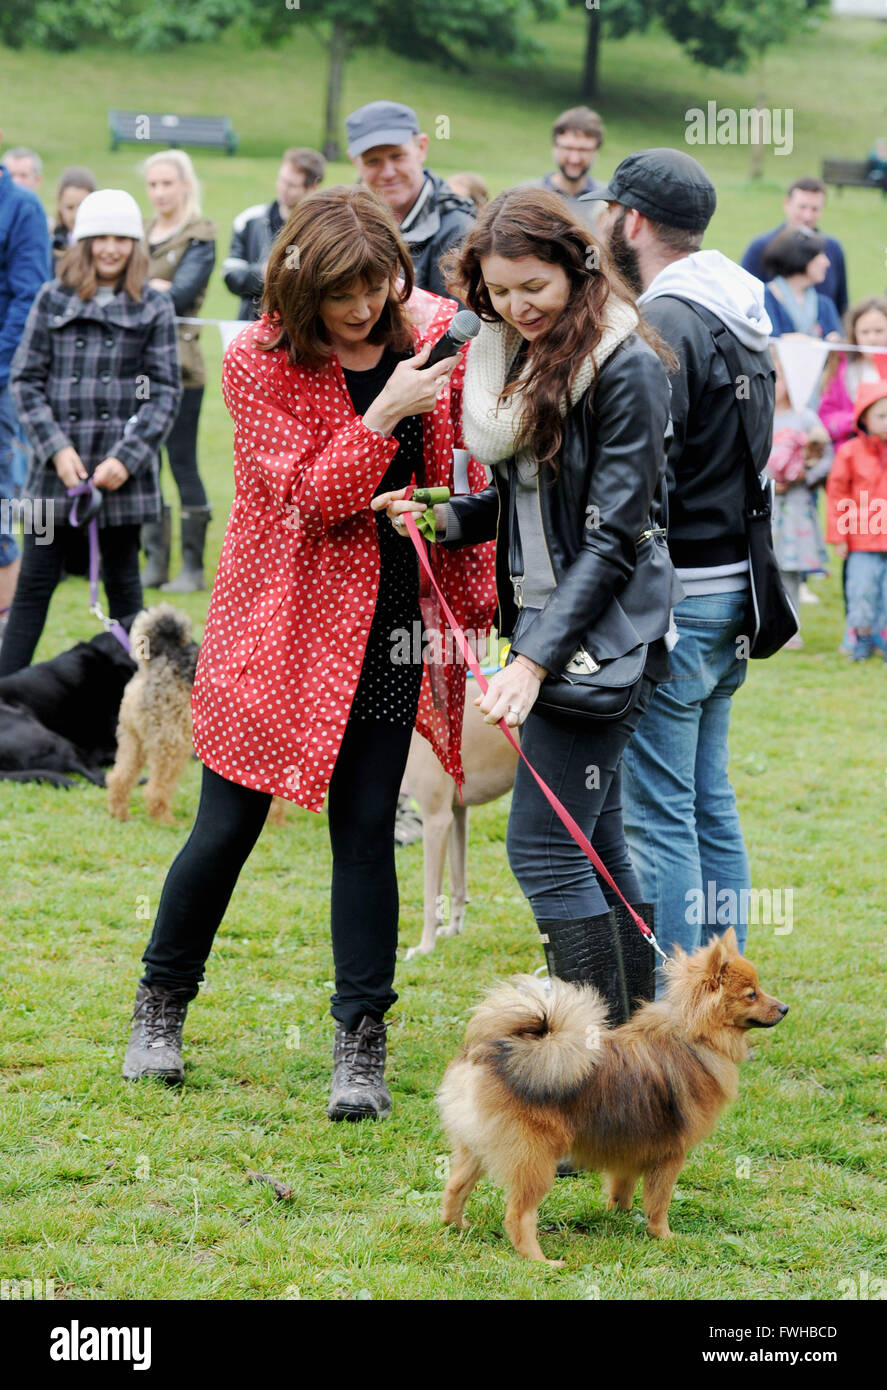 Brighton UK 12th June 2016 -  Compere Annabel Giles meets entrants at the annual Bark in the Park Dog Show held in Queens Park Brighton and which has become one of the most popular community events in the city  Credit:  Simon Dack/Alamy Live News Stock Photo